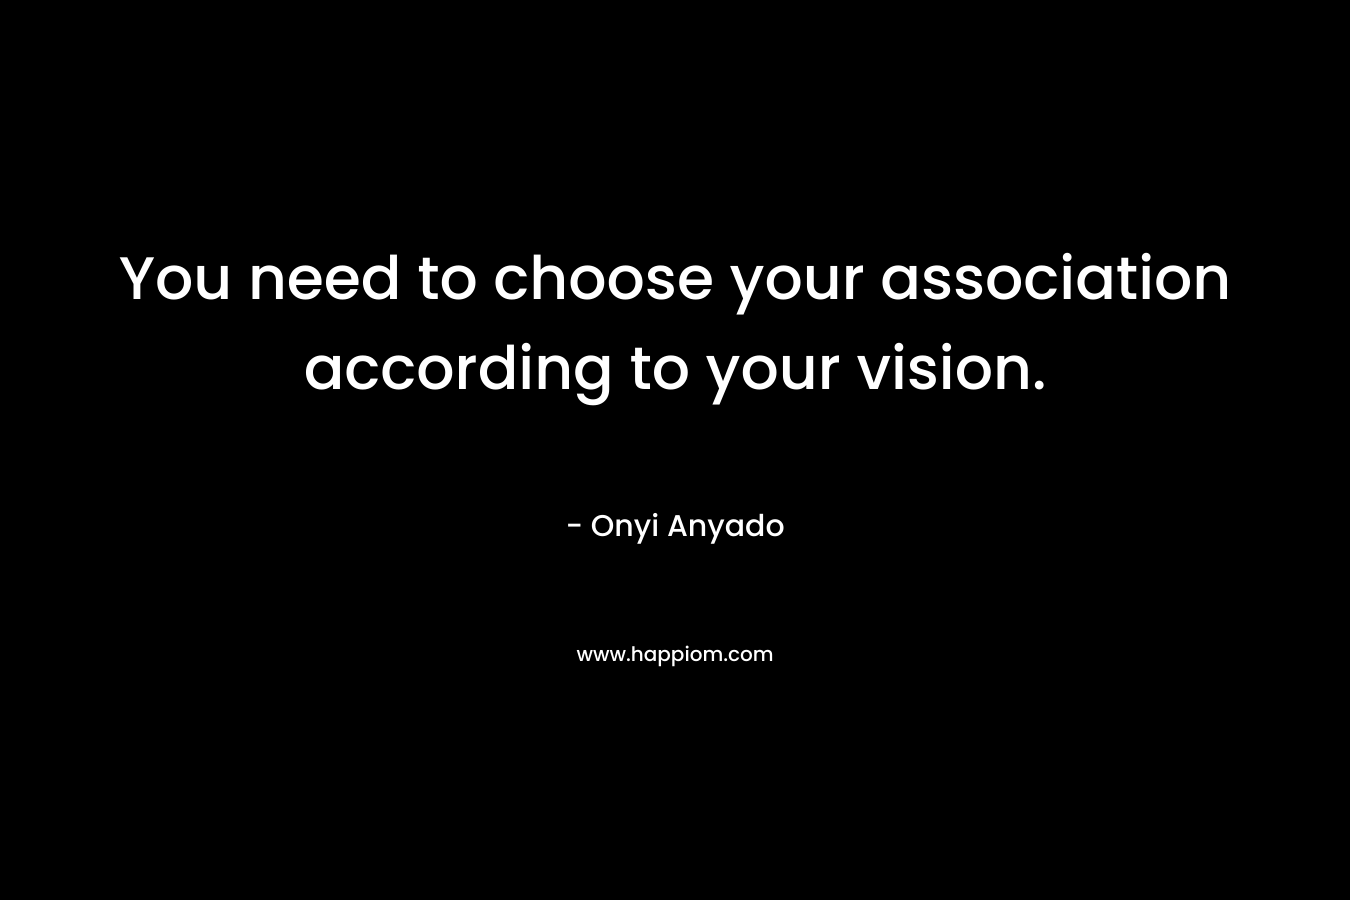 You need to choose your association according to your vision. – Onyi Anyado